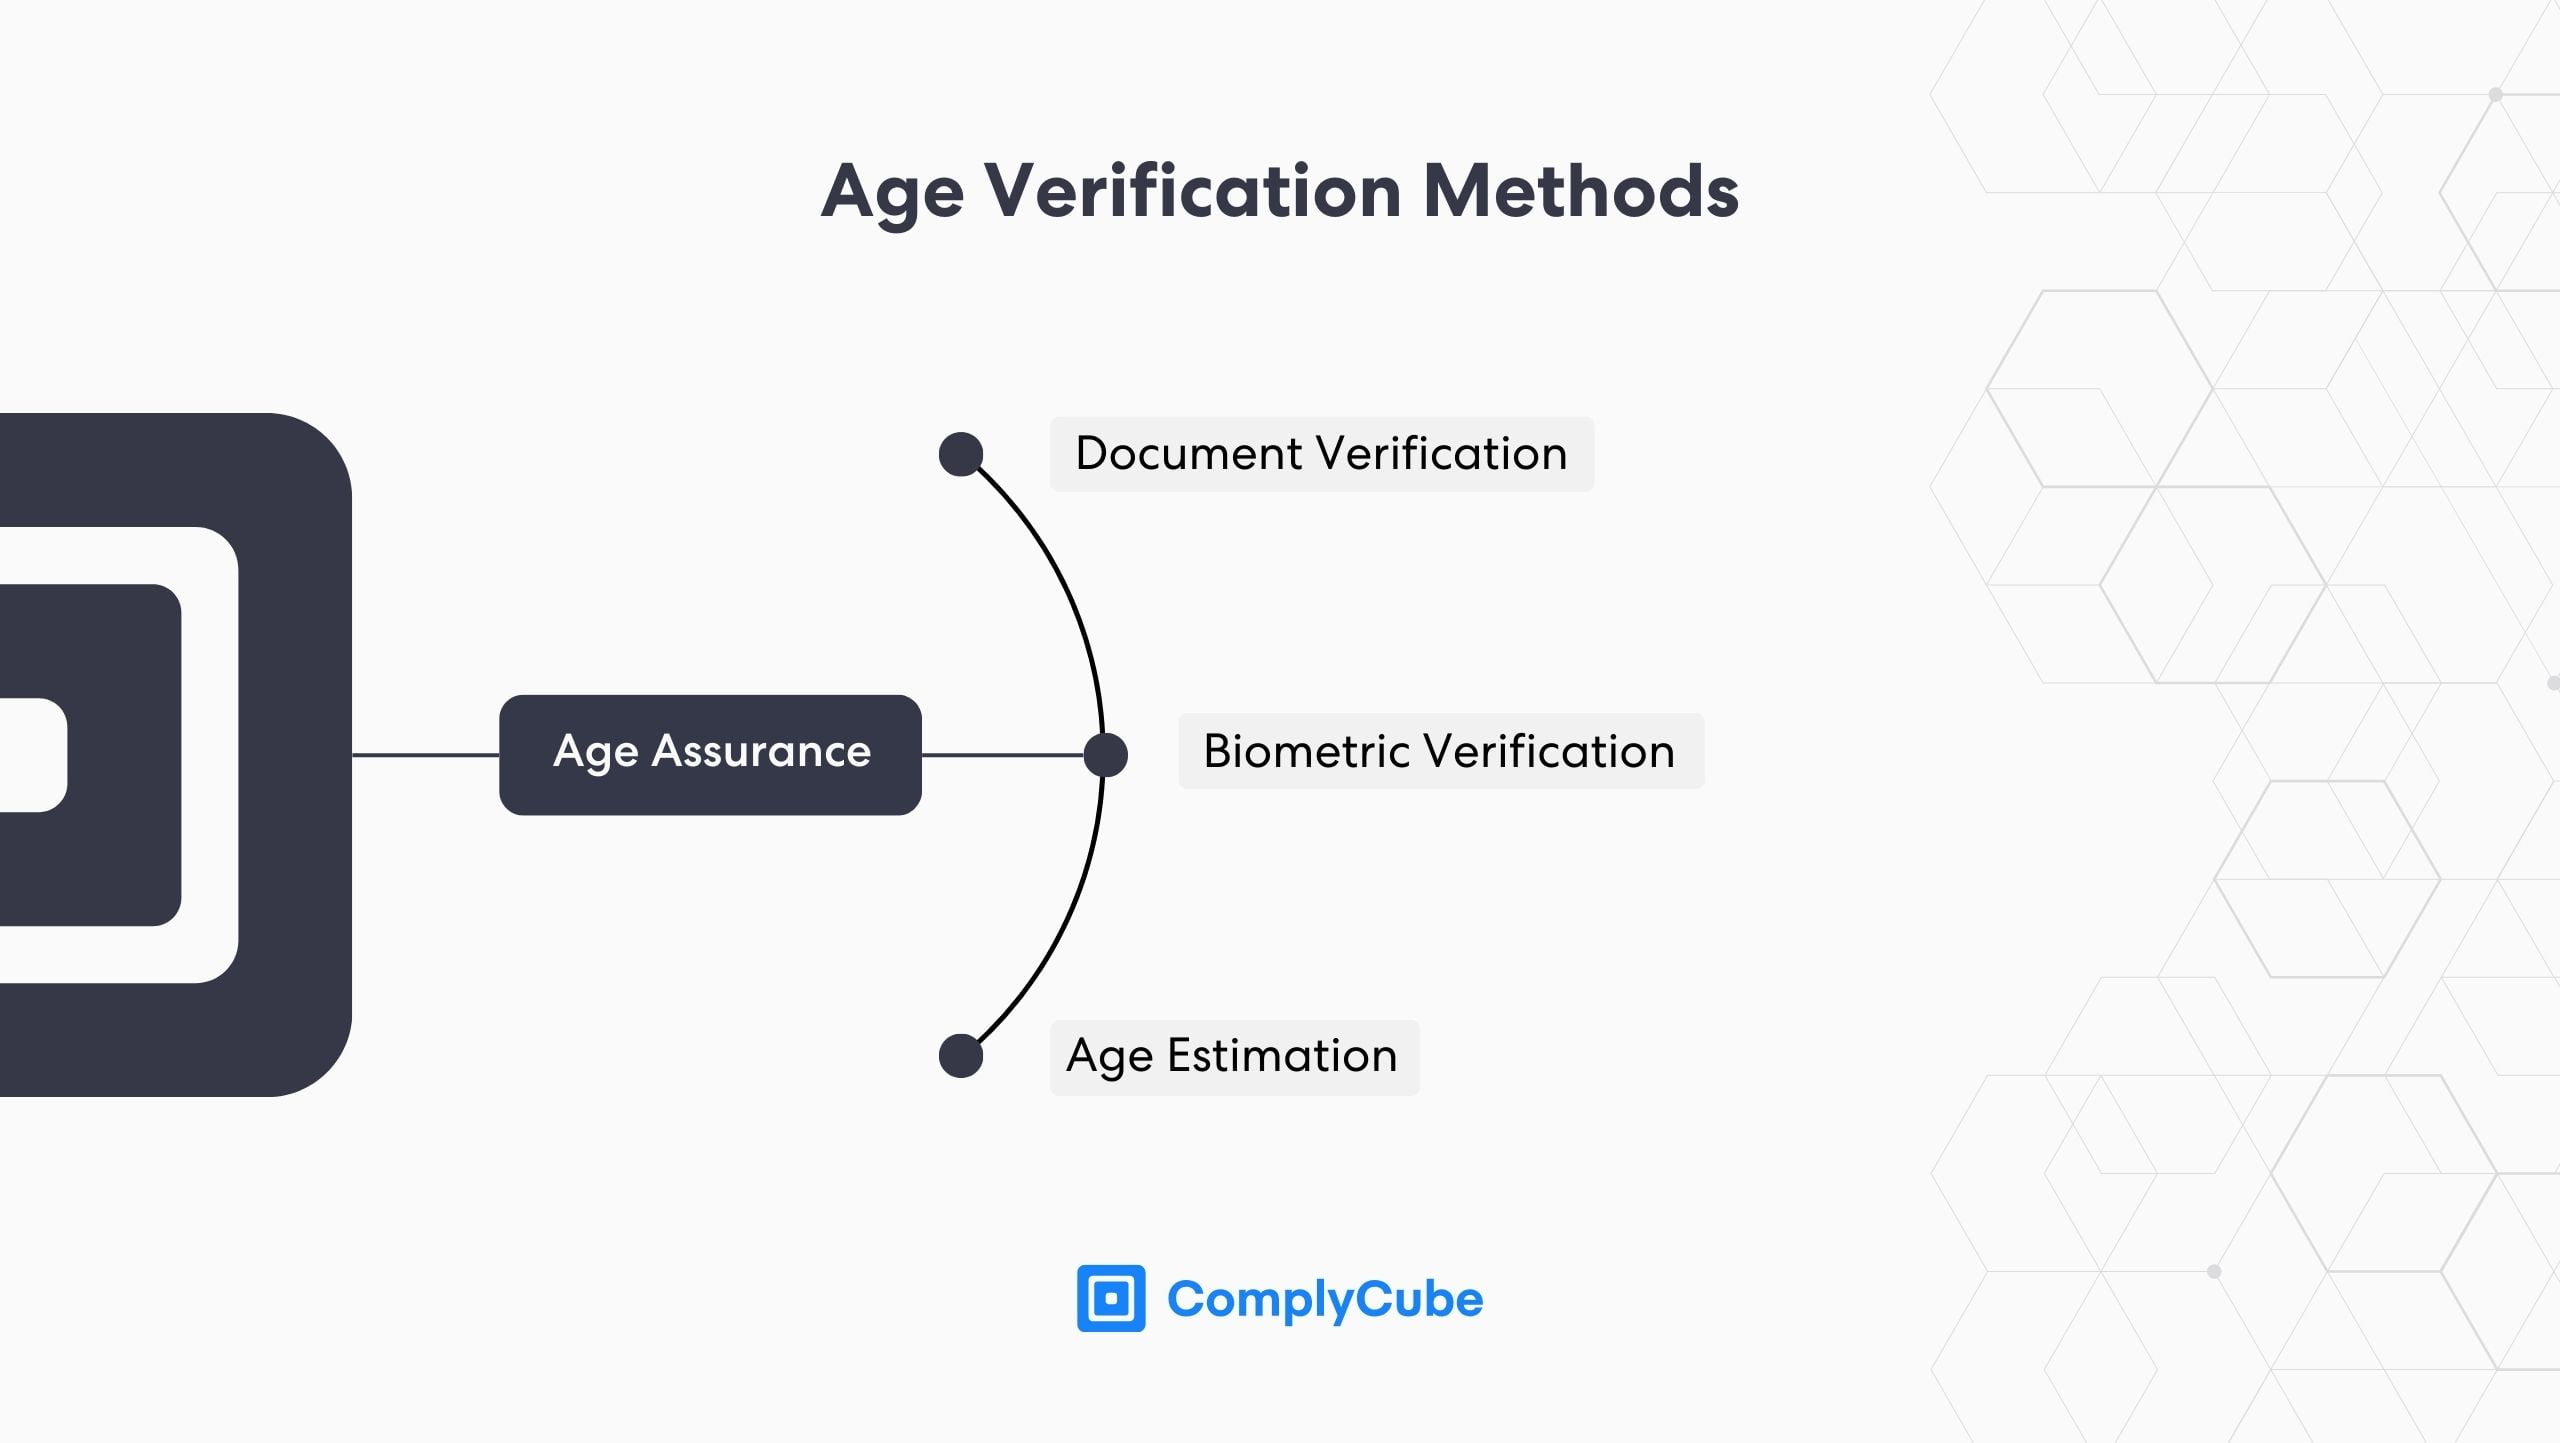 Key tools for age verification